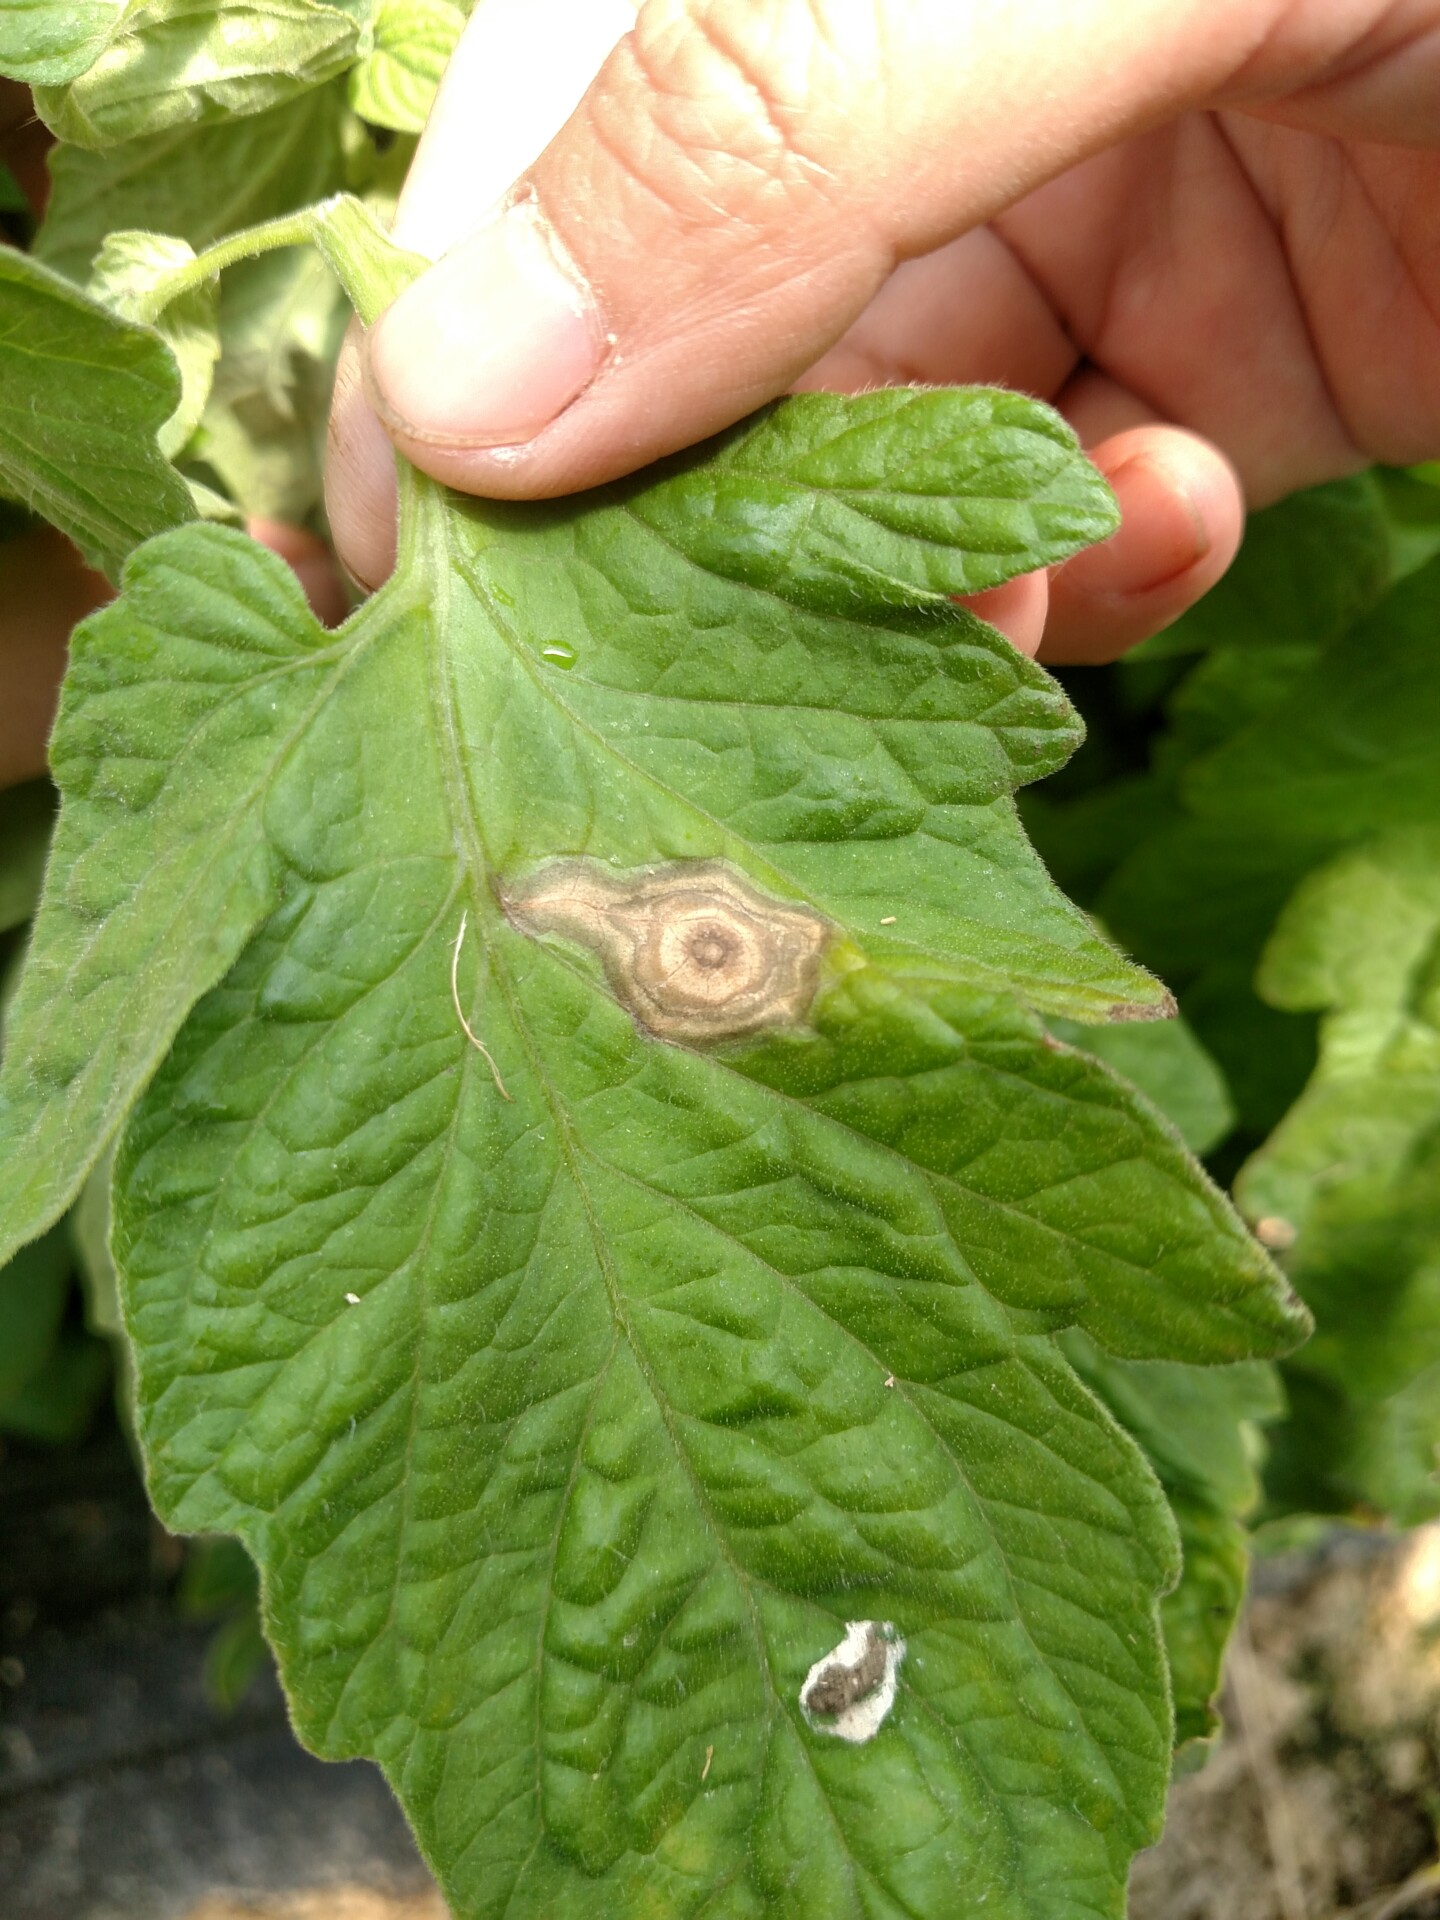 Lesion of gray mold on tomato leaf. Note ring structure.